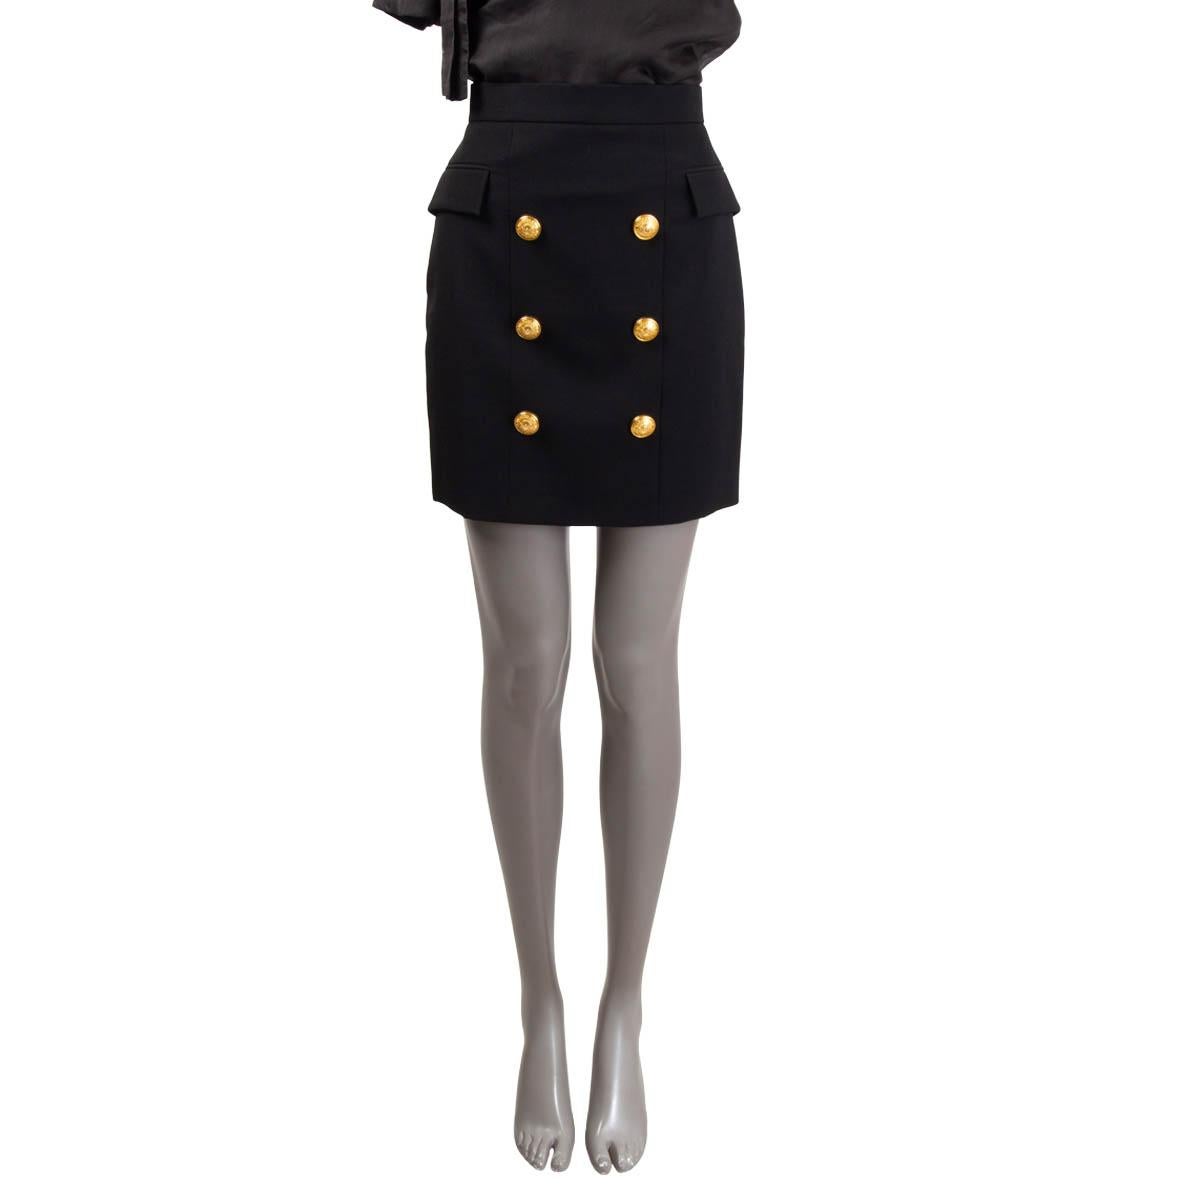 100% authentic Balmain high waisted mini skirt in black wool (100%). The design showcases large engraved decorative gold-tone buttons on the front, giving the piece that classic Balmain feel. Side flap pockets and a gold-tone metal zip fastening at